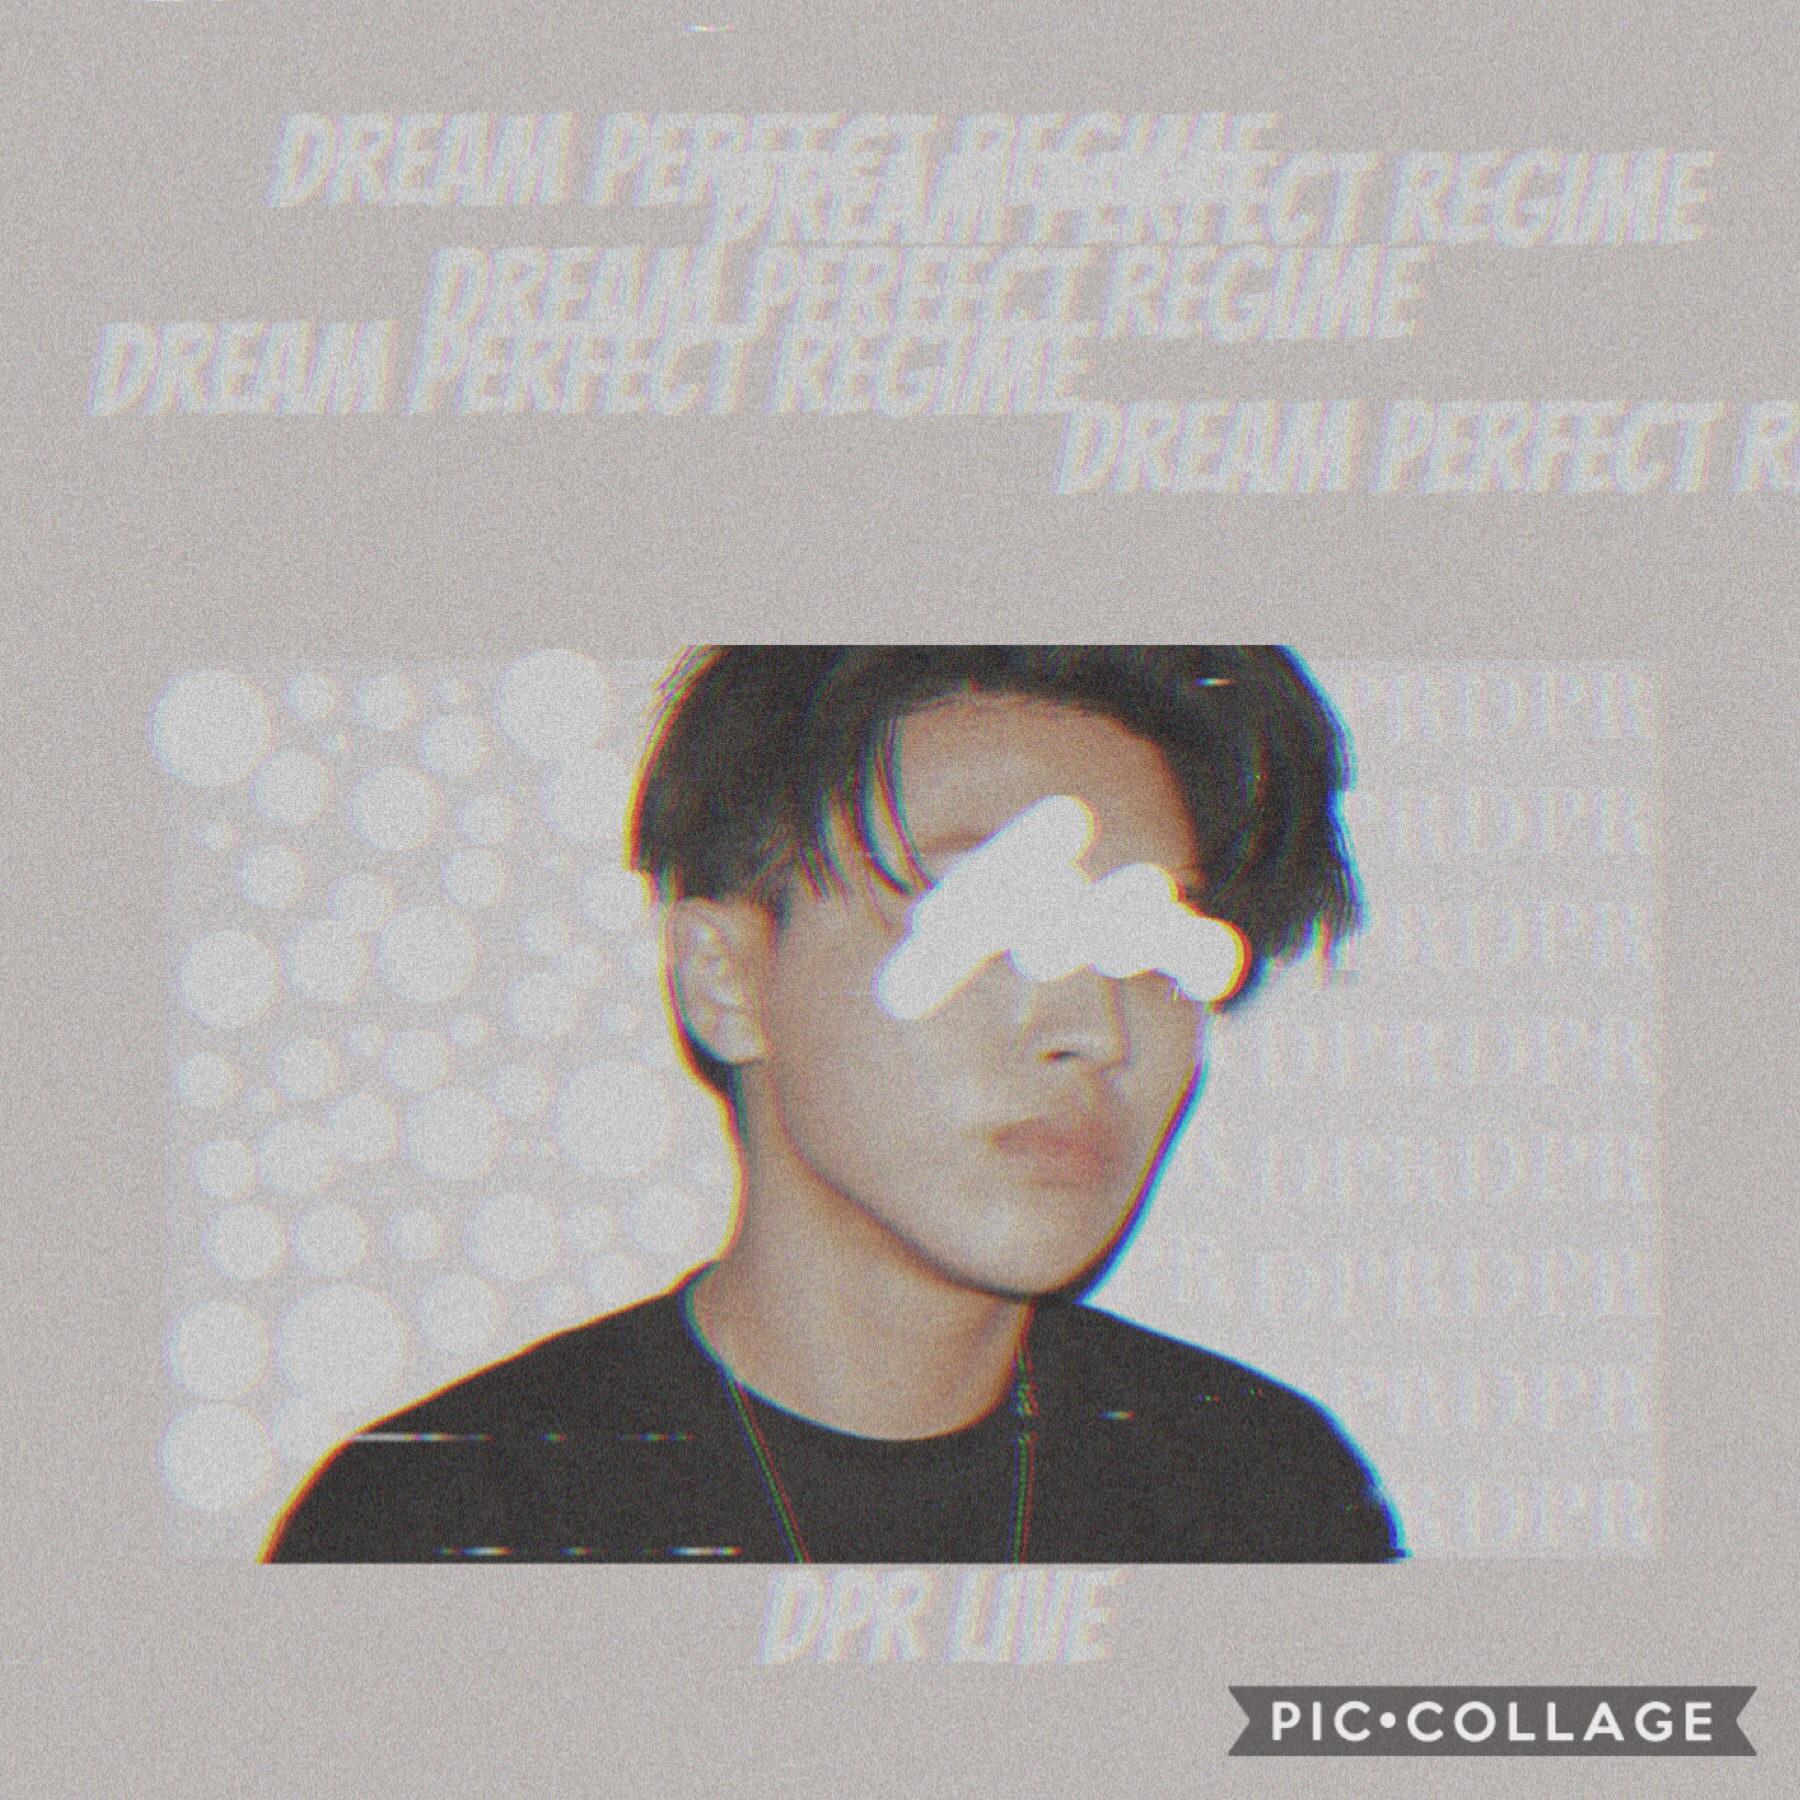 TApPy tapP tApp


Edit to show my love for DPR 




Sorry for the inactivity 



Check remixes




Qotd: if there was any language you would want to learn what language would it be




Aotd: korean. So I wouldn’t have to wait so long for someone to transl